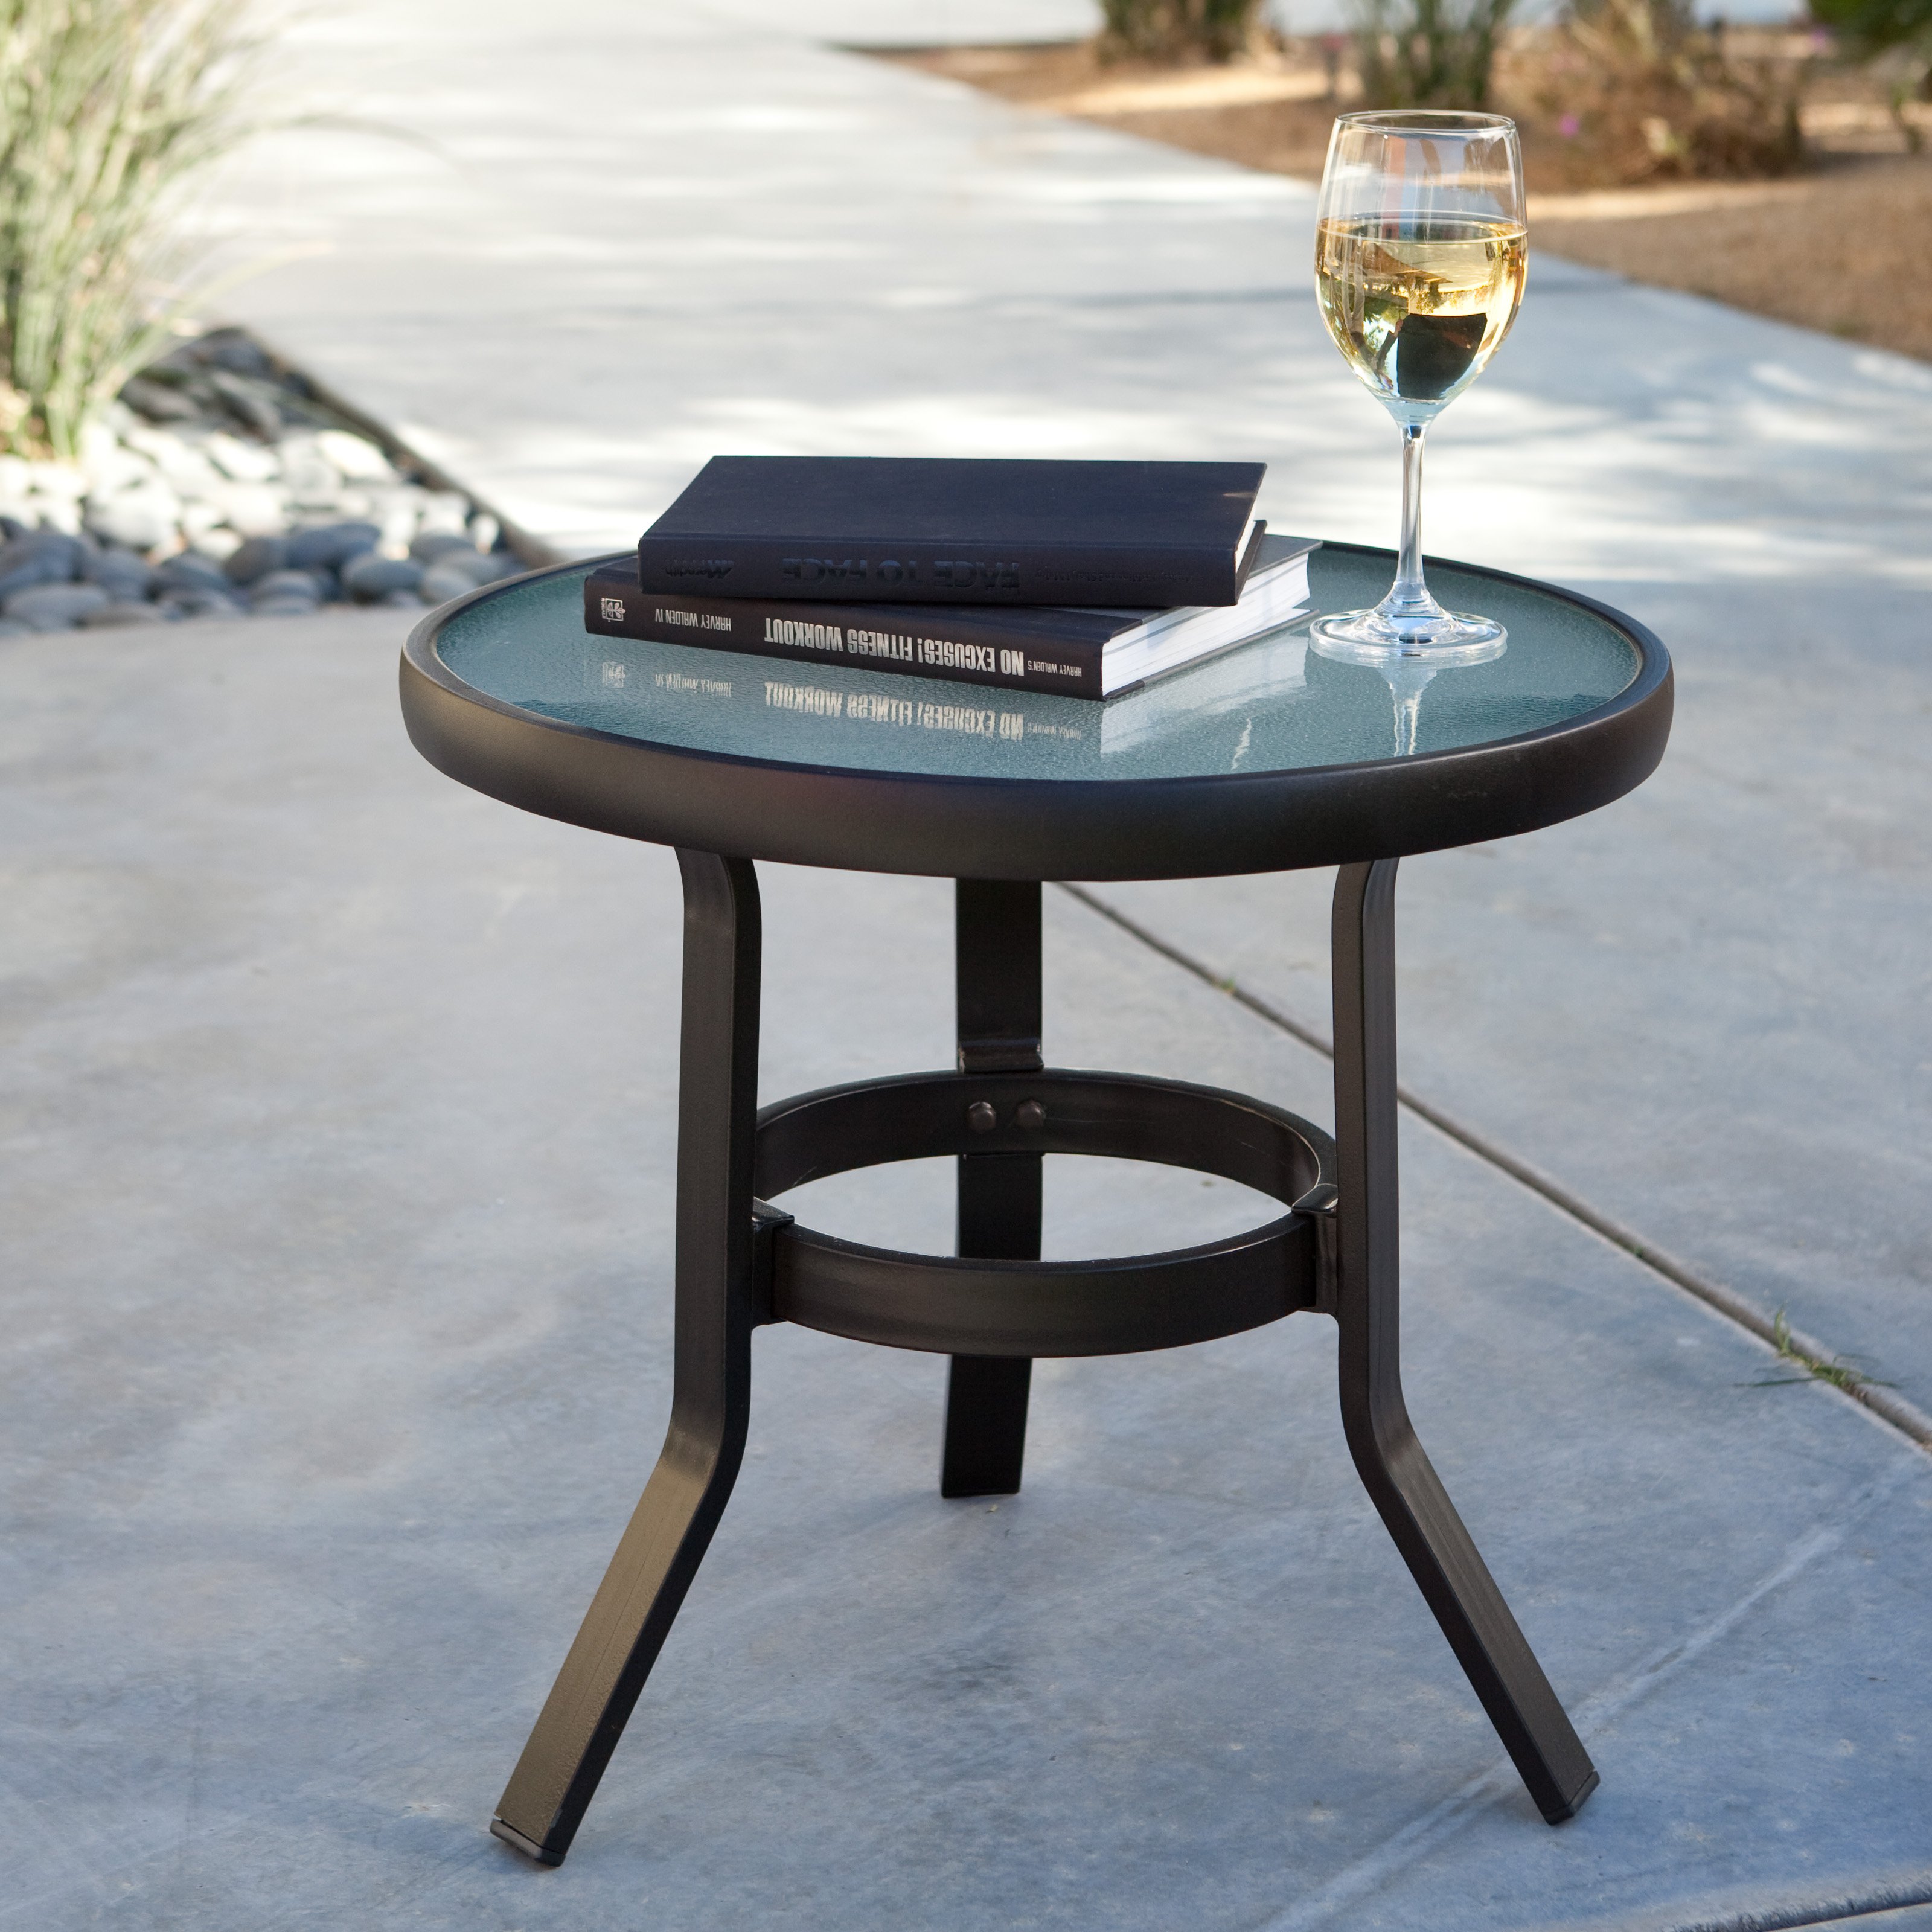 appealing metal patio side table crosley round furniture small outdoor fisher glass canadian wilson tire vintage retro clearance red top target glamorous tables full size walnut